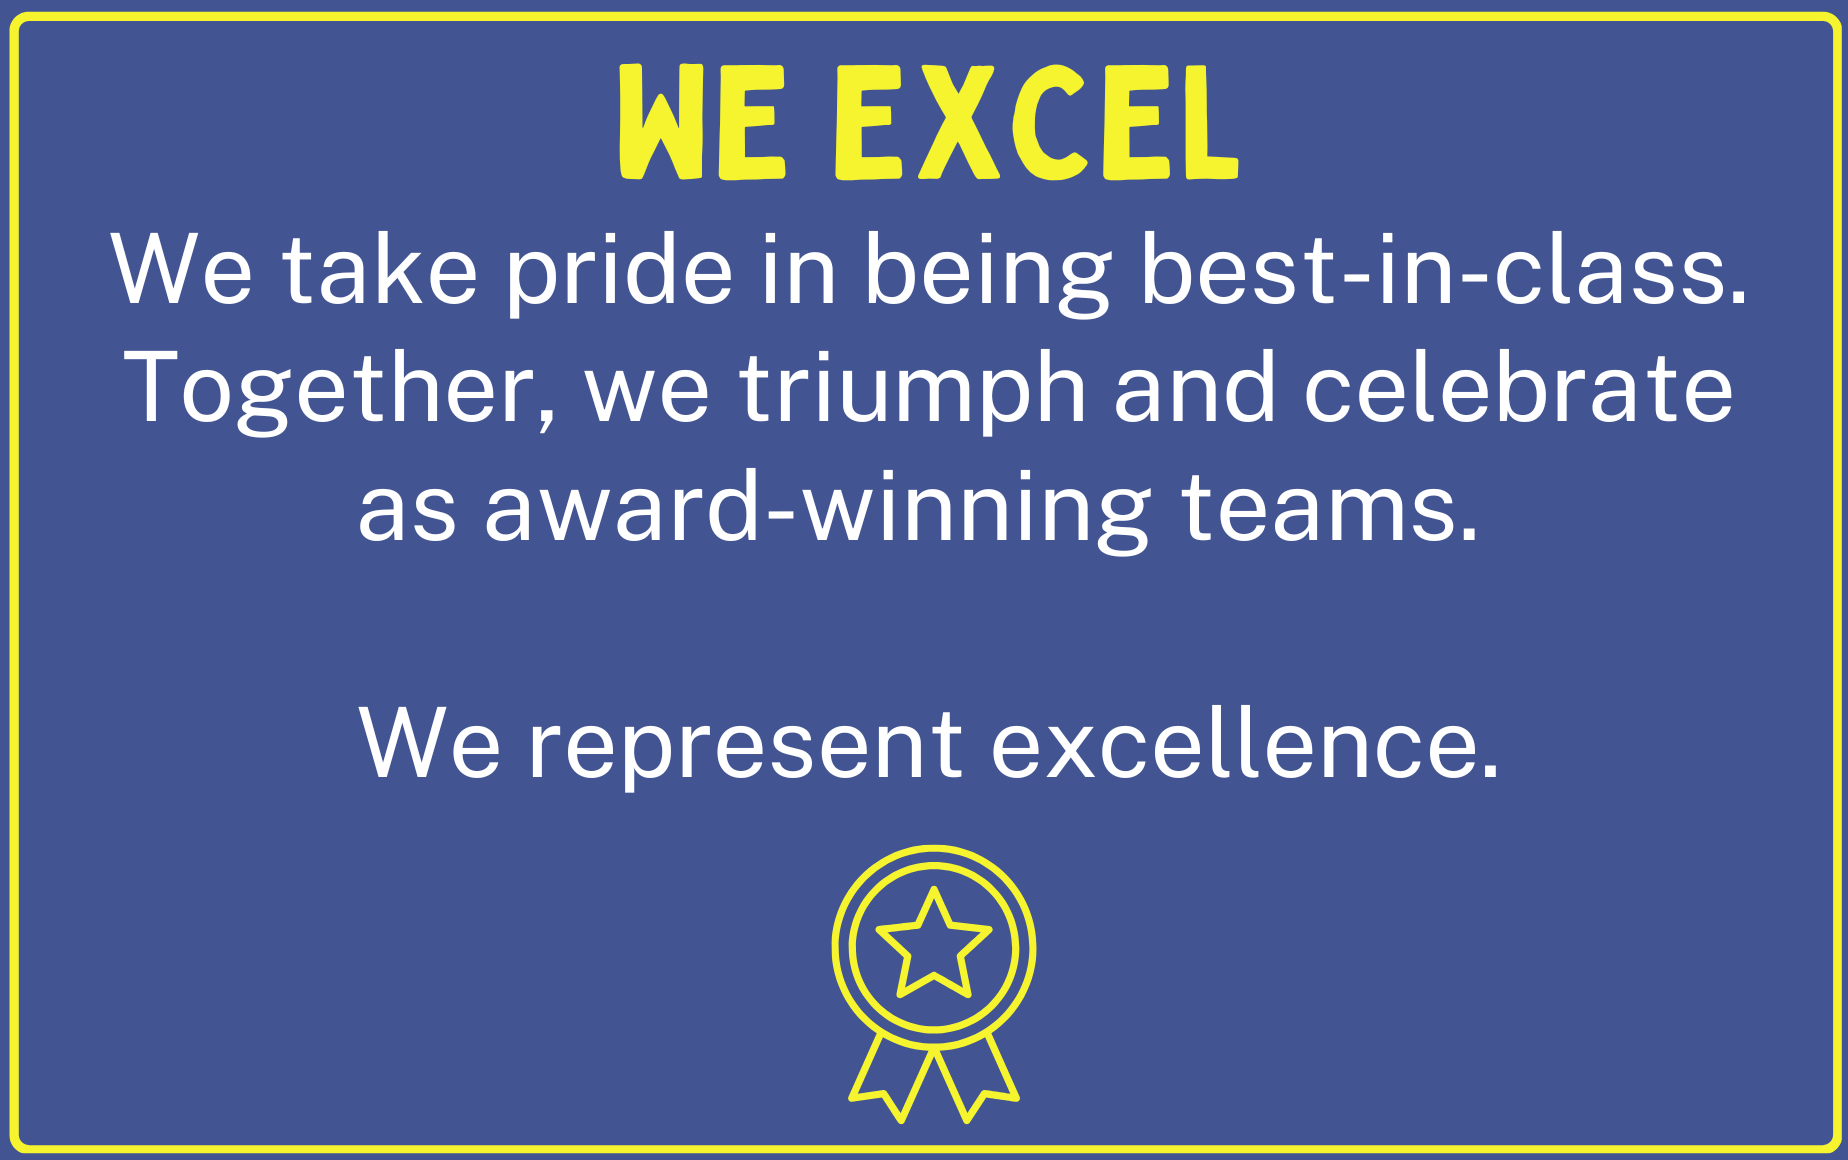 We Excel. We take pride in being best-in-class. Together, we triumph and celebrate as award-winning teams. We represent excellence.